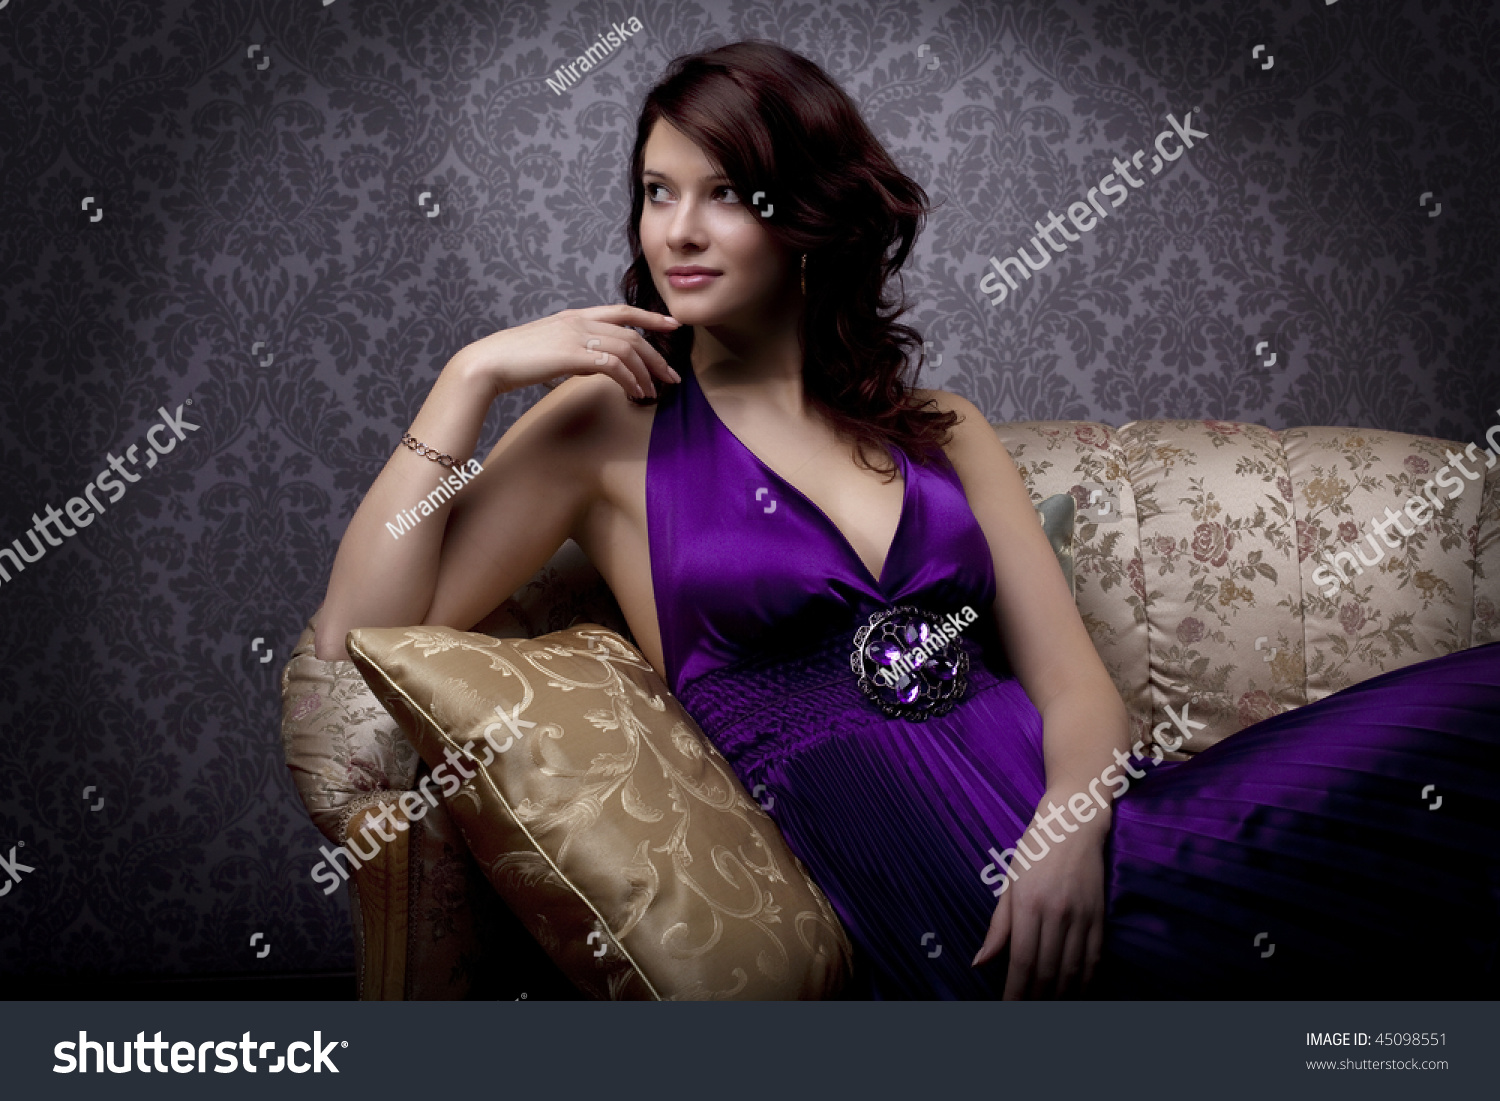 Images Beautiful Glamorous Girl On Couch Stock Photo Edit Now